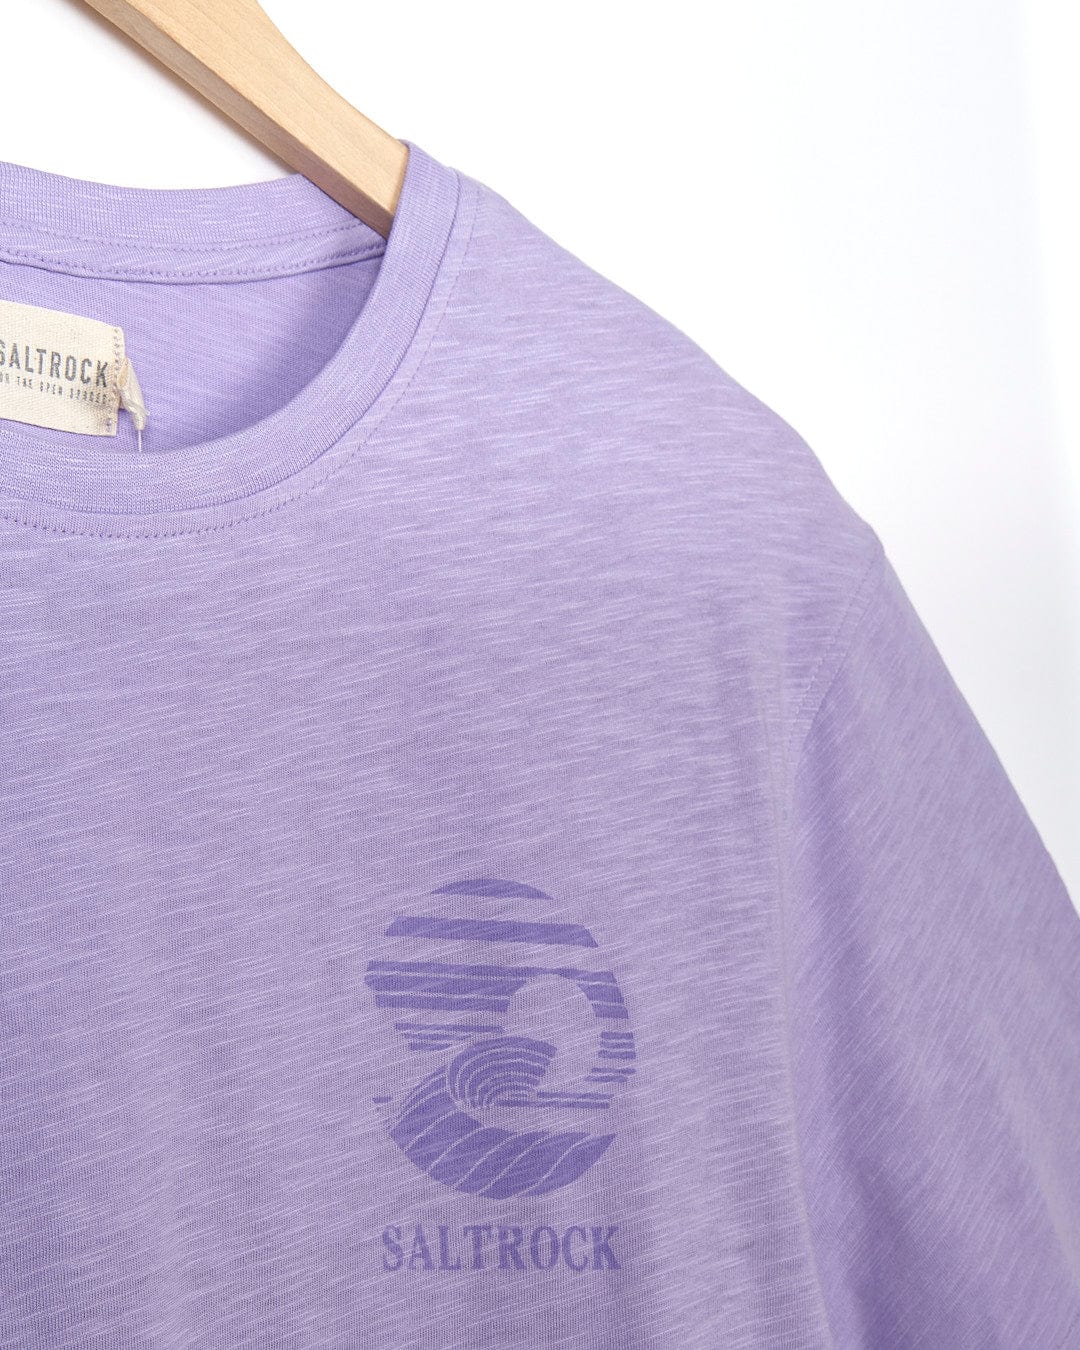 An Atlantic - Mens Short Sleeve T-Shirt - Purple with the brand name Saltrock on it.